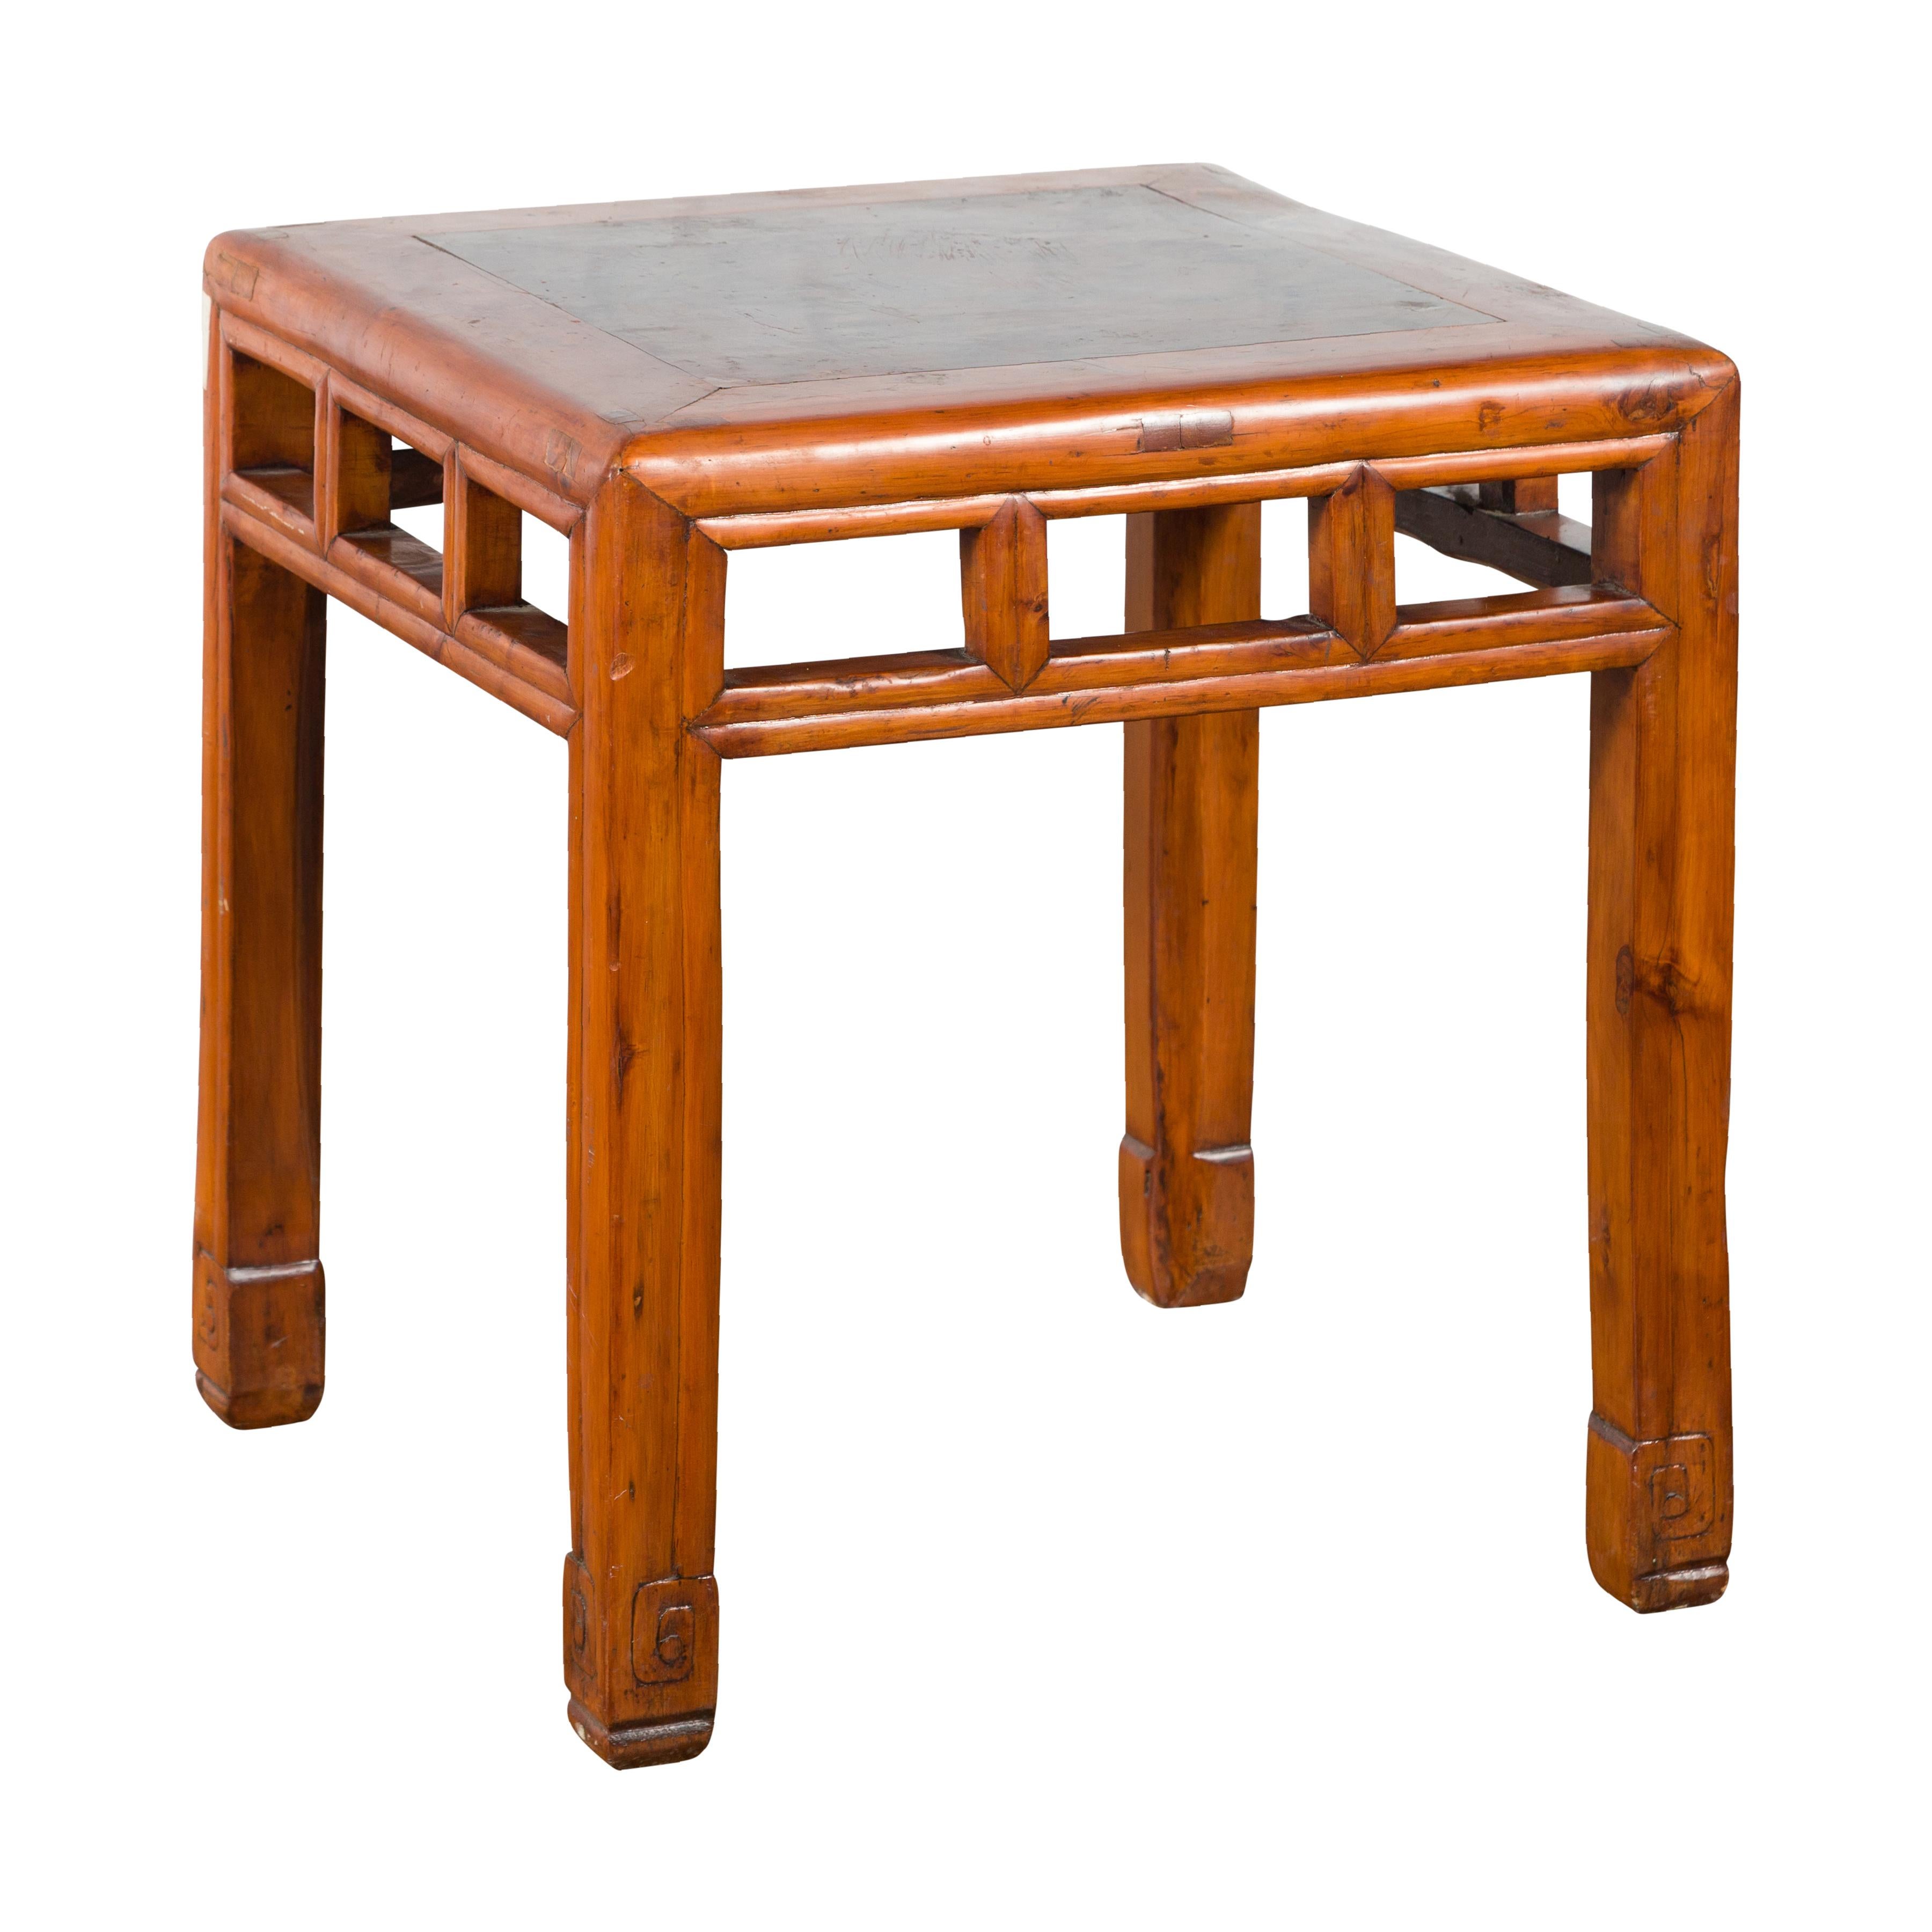 A vintage Chinese elm wood side table from the mid-20th century, with burl inset top and natural wood stain, open apron and pillar strut motifs. Created in China during the midcentury period, this vintage side table presents a linear silhouette